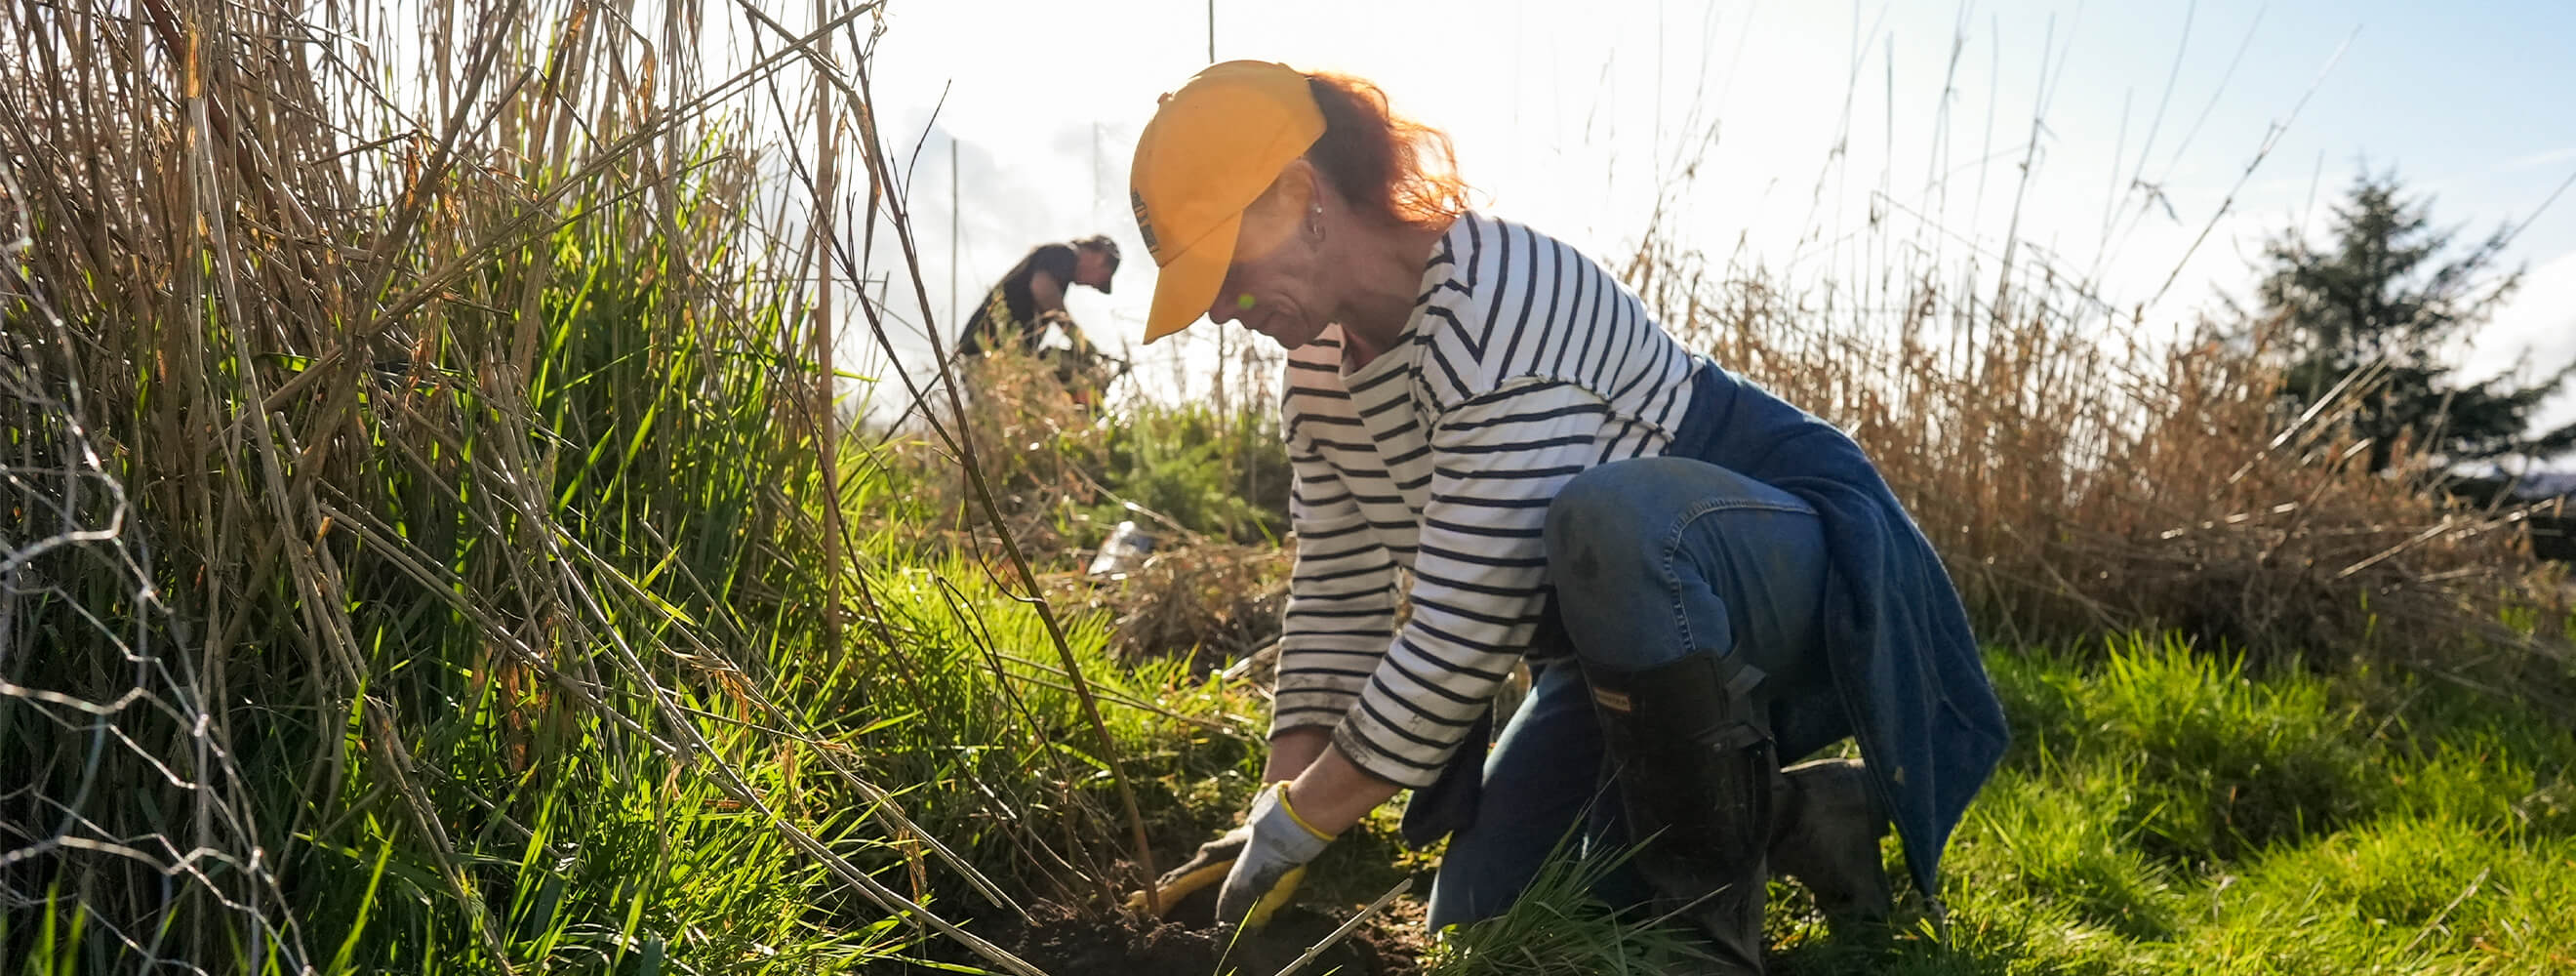 a person in a yellow baseball hat and striped shirt digs in the soil on a farm.